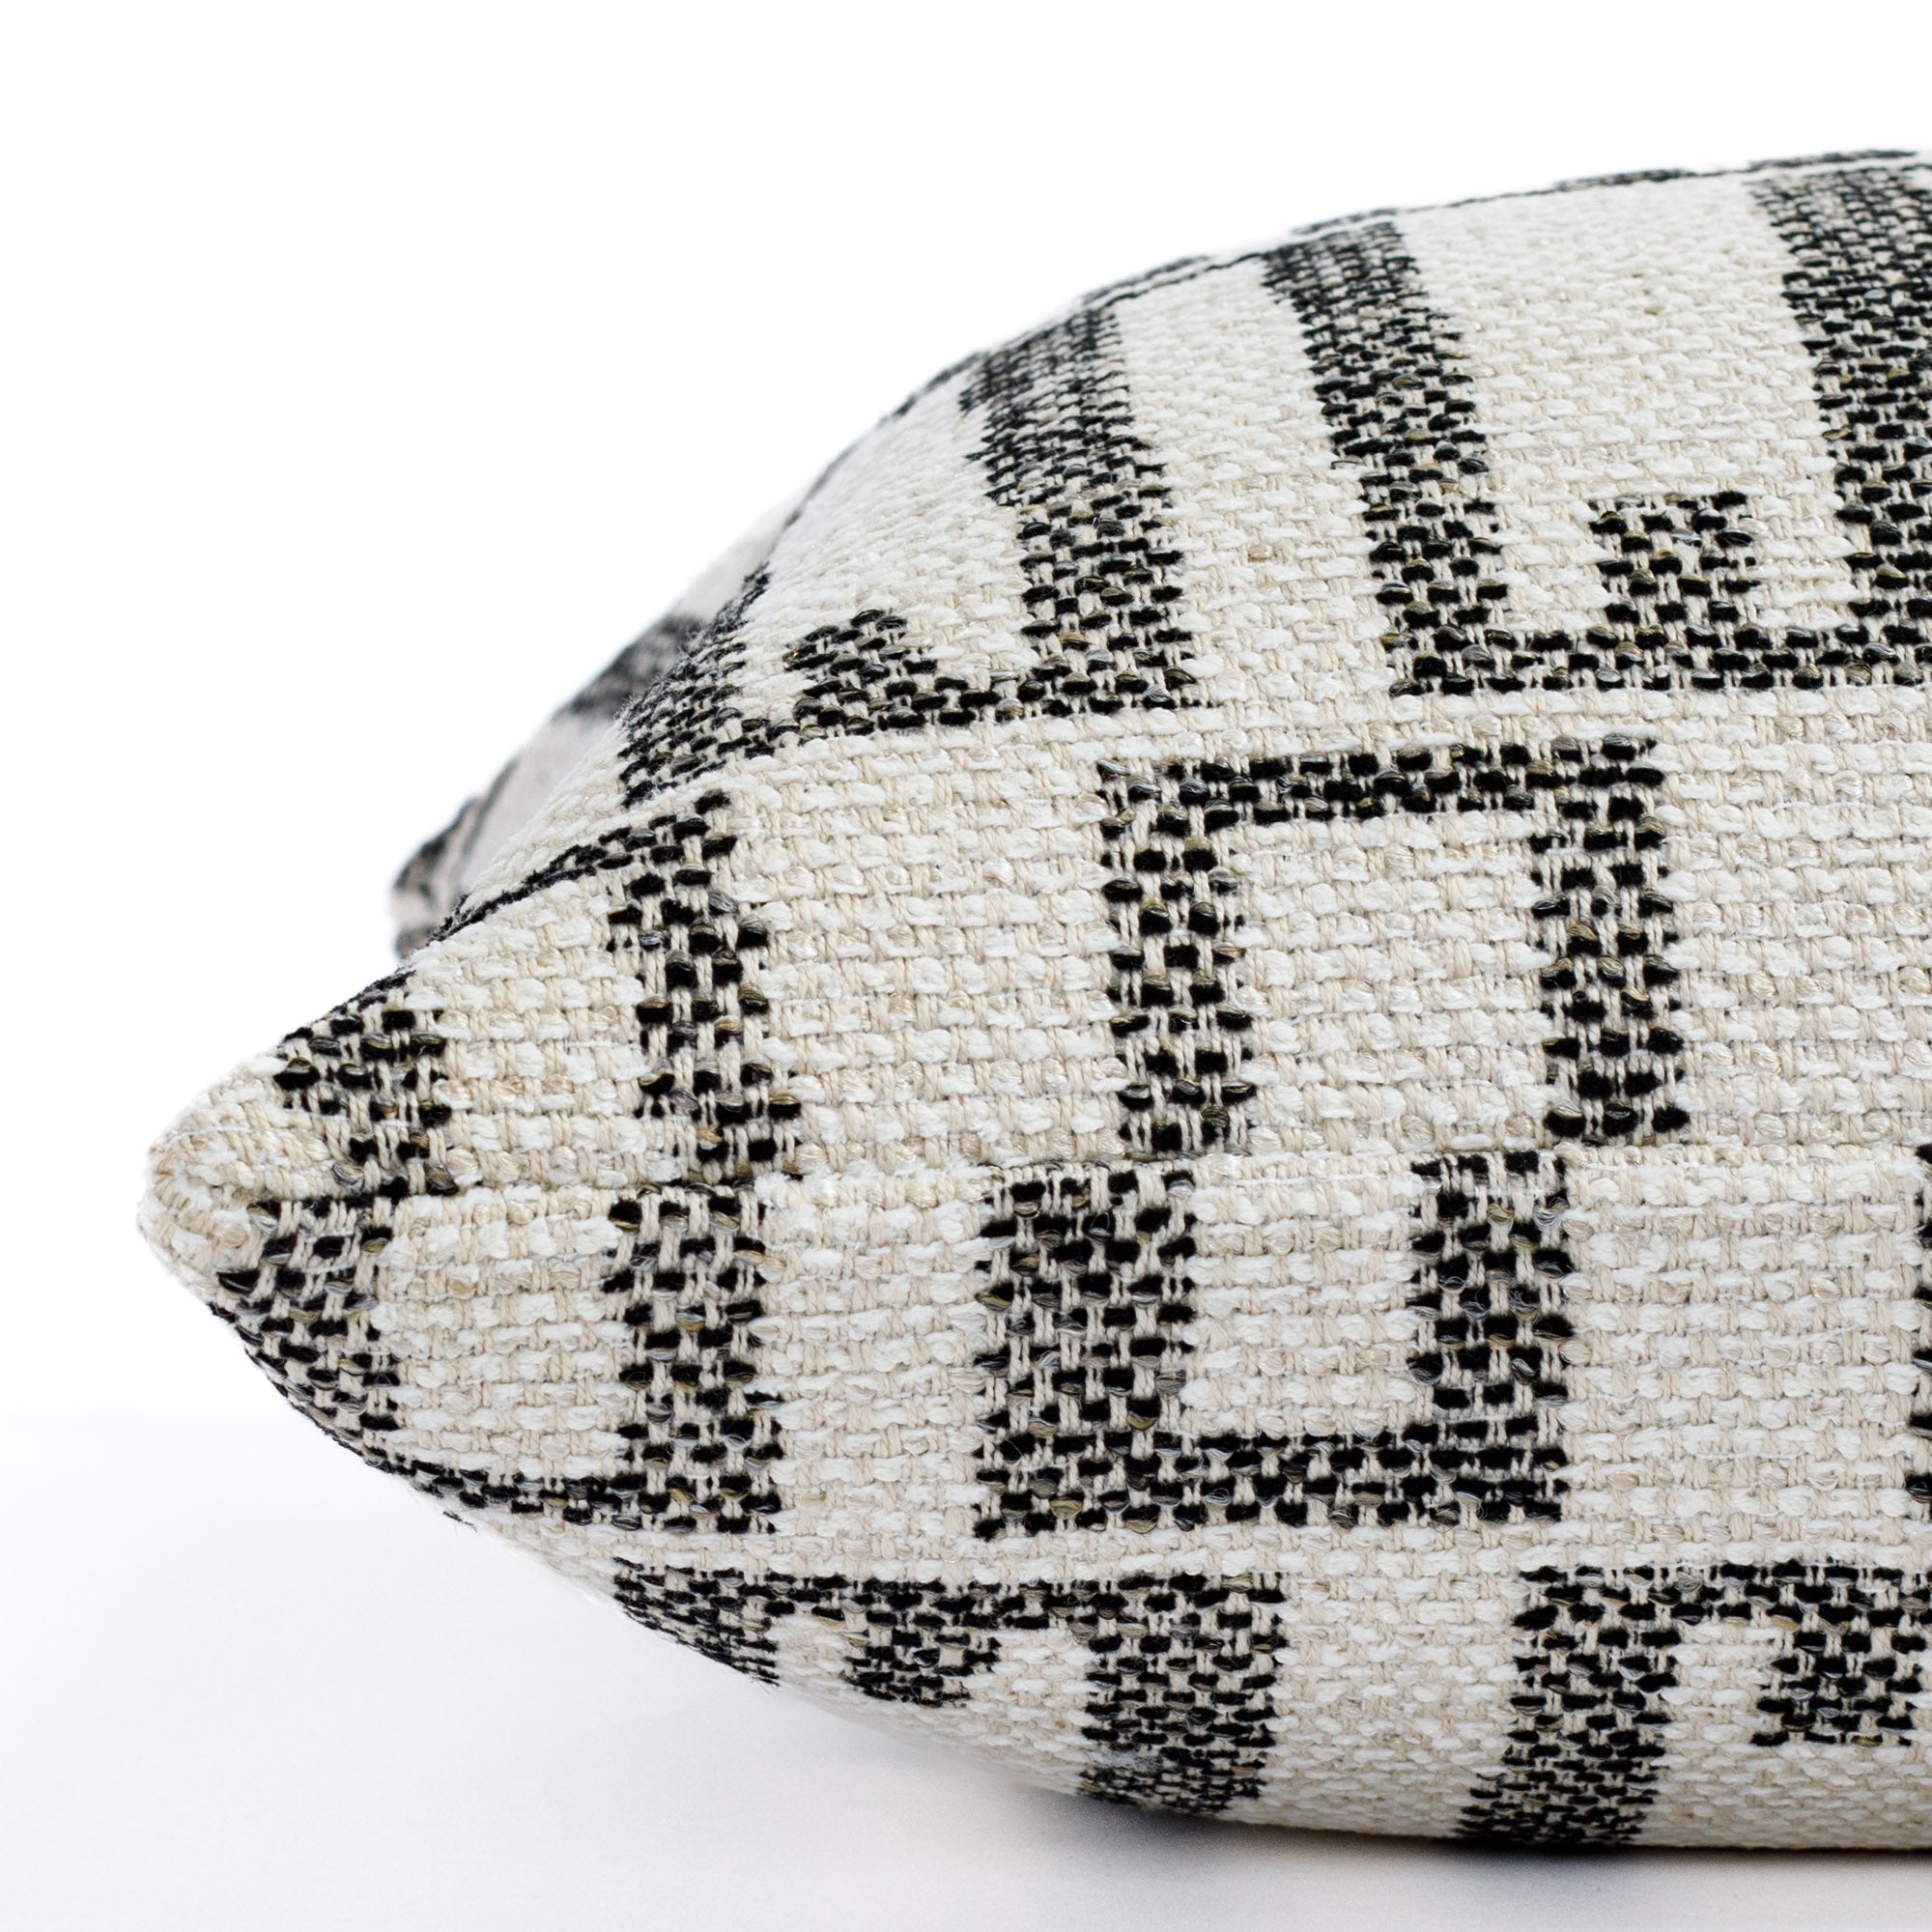 a cream and black organic geometric outdoor throw pillow : close up side view